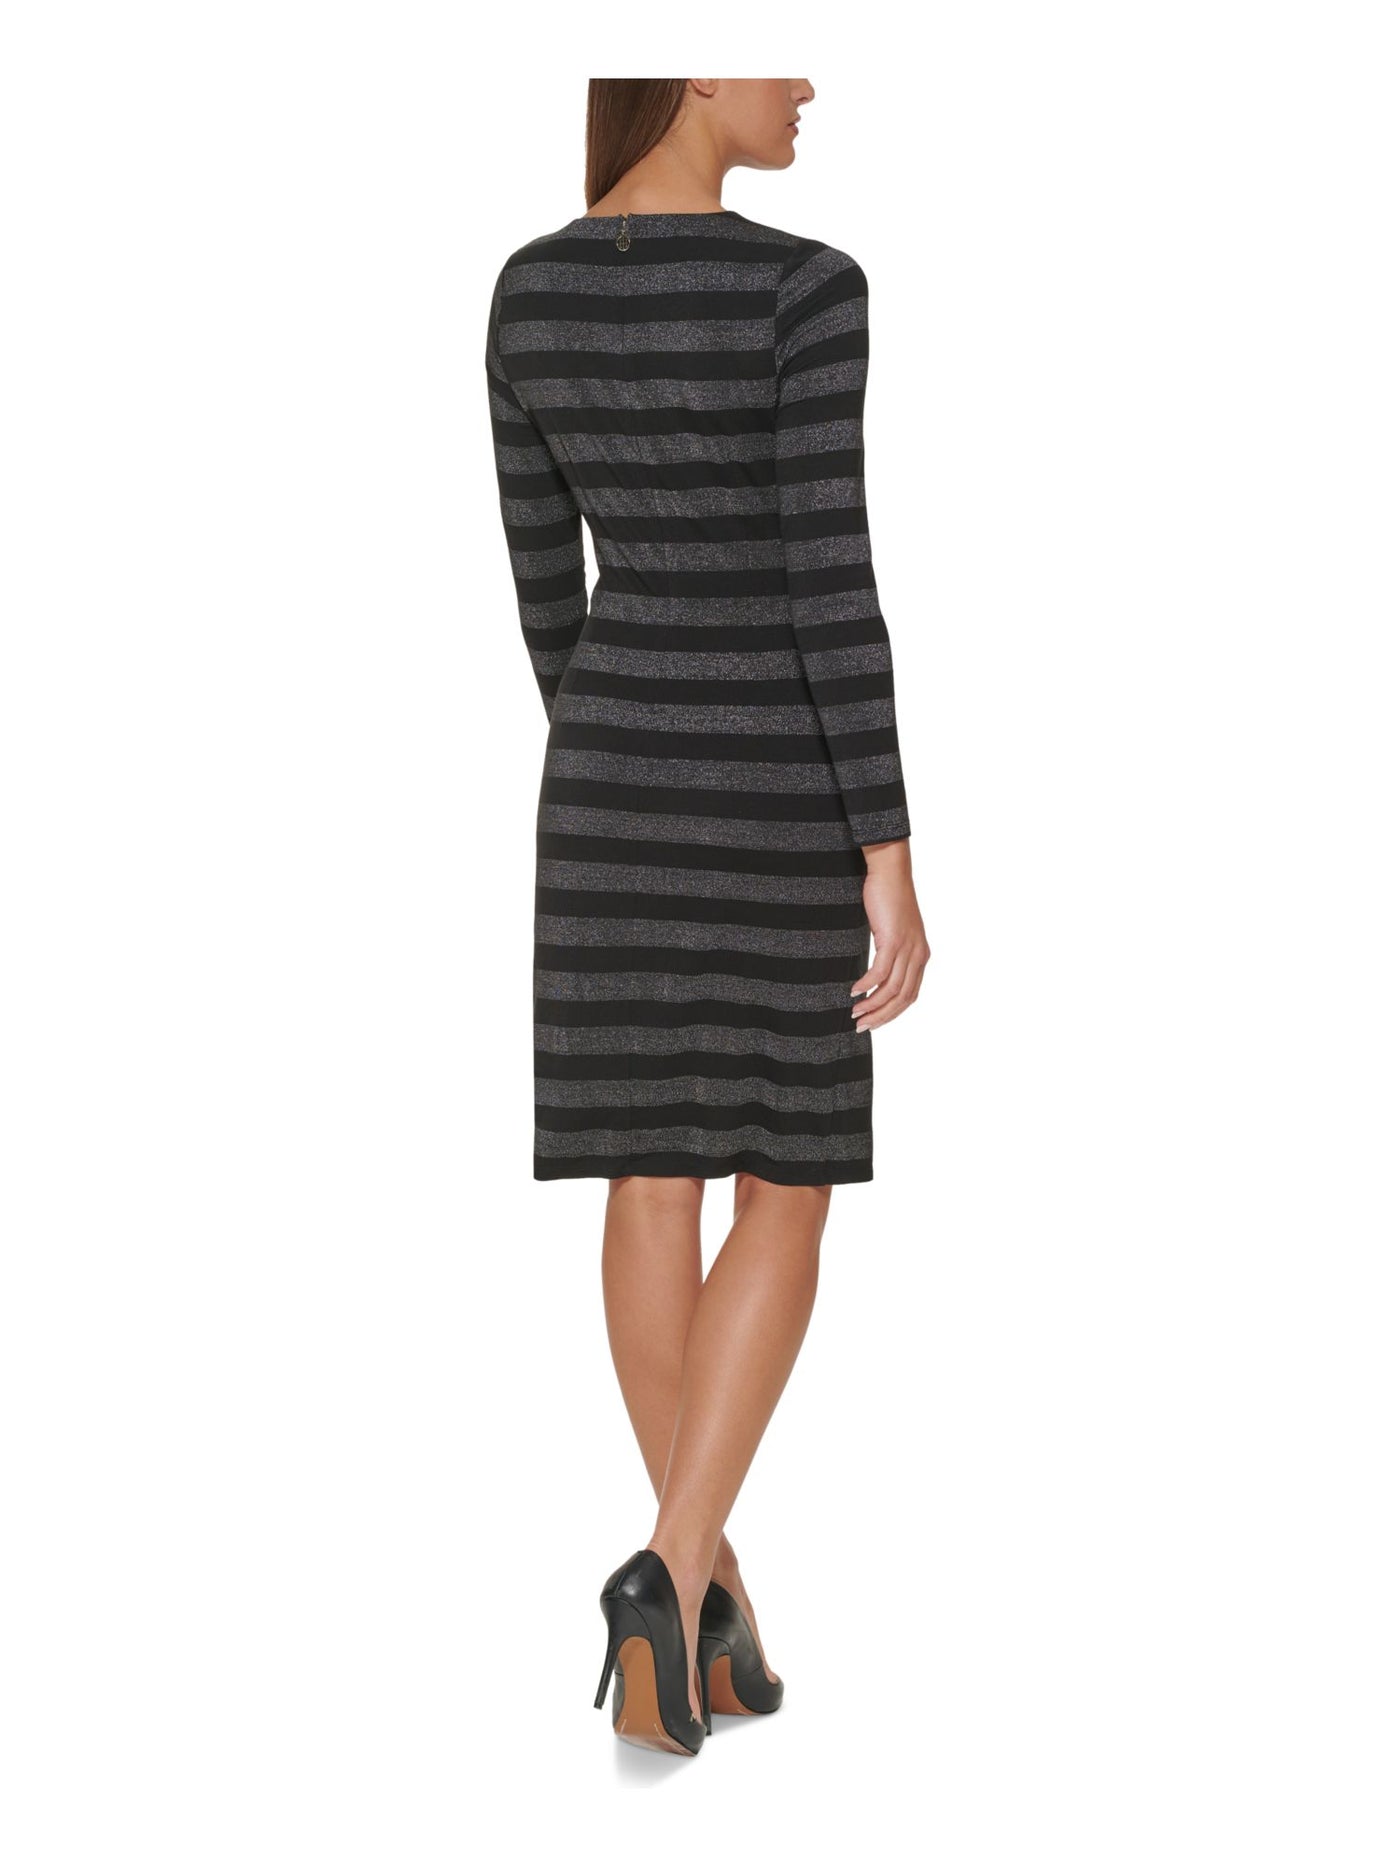 TOMMY HILFIGER Womens Black Zippered Unlined Twisted At Waist Striped Long Sleeve Round Neck Knee Length Sheath Dress 10